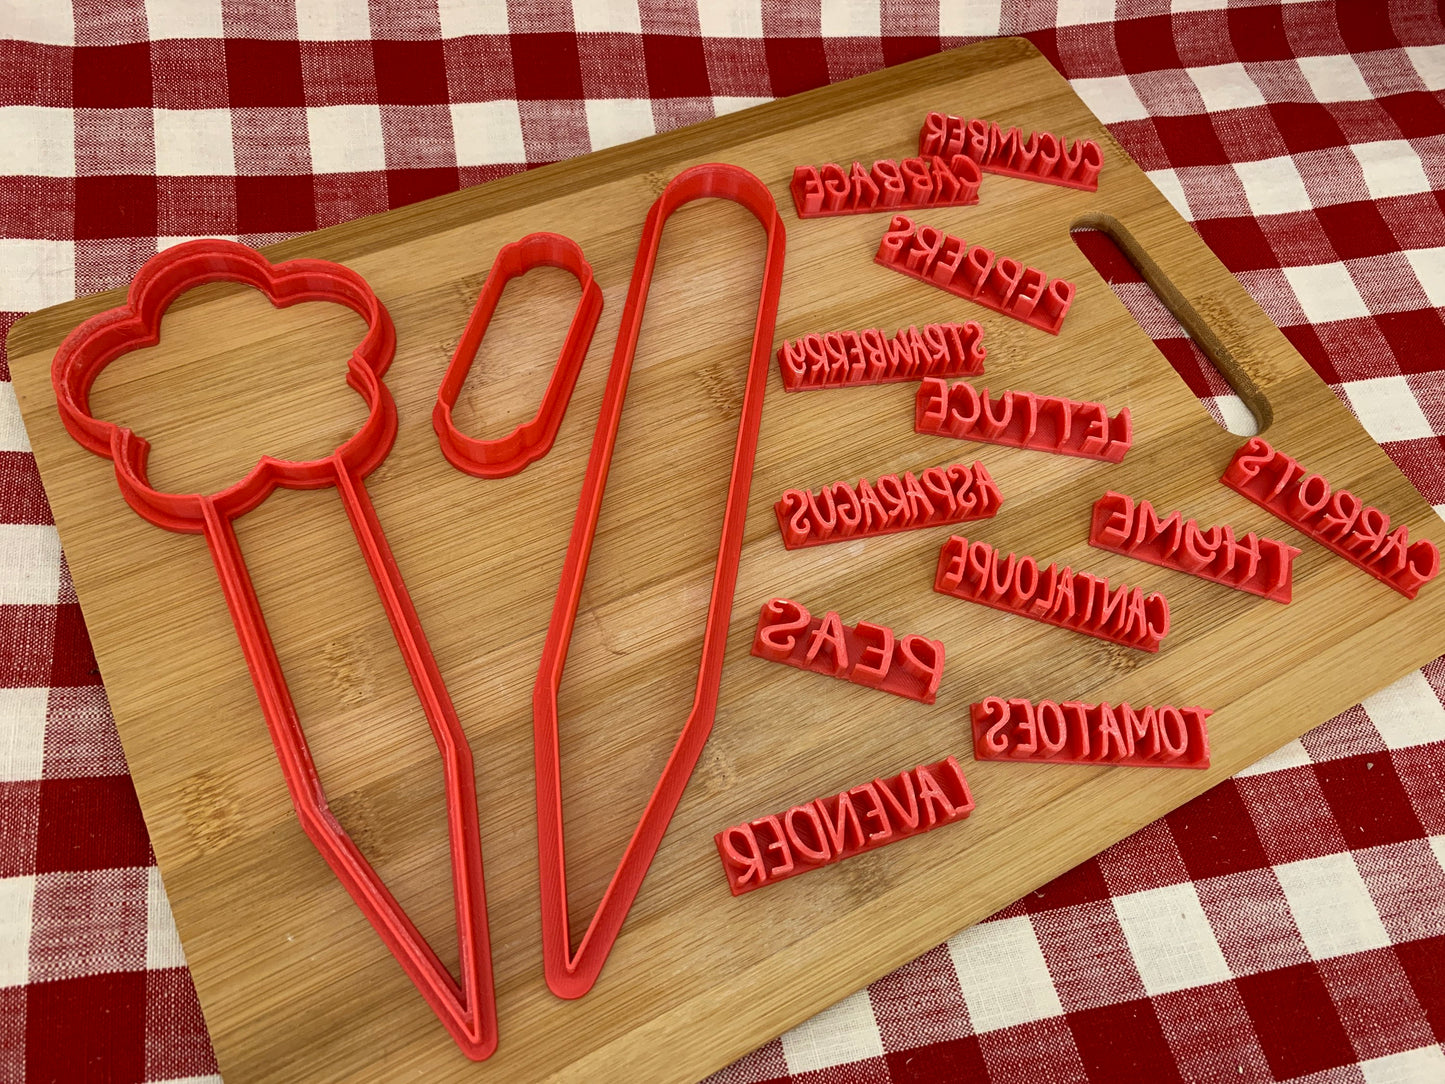 Garden/Planter stake, Plant marker, Clay Cutter - Plastic 3D Printed, Set or Each, DIY